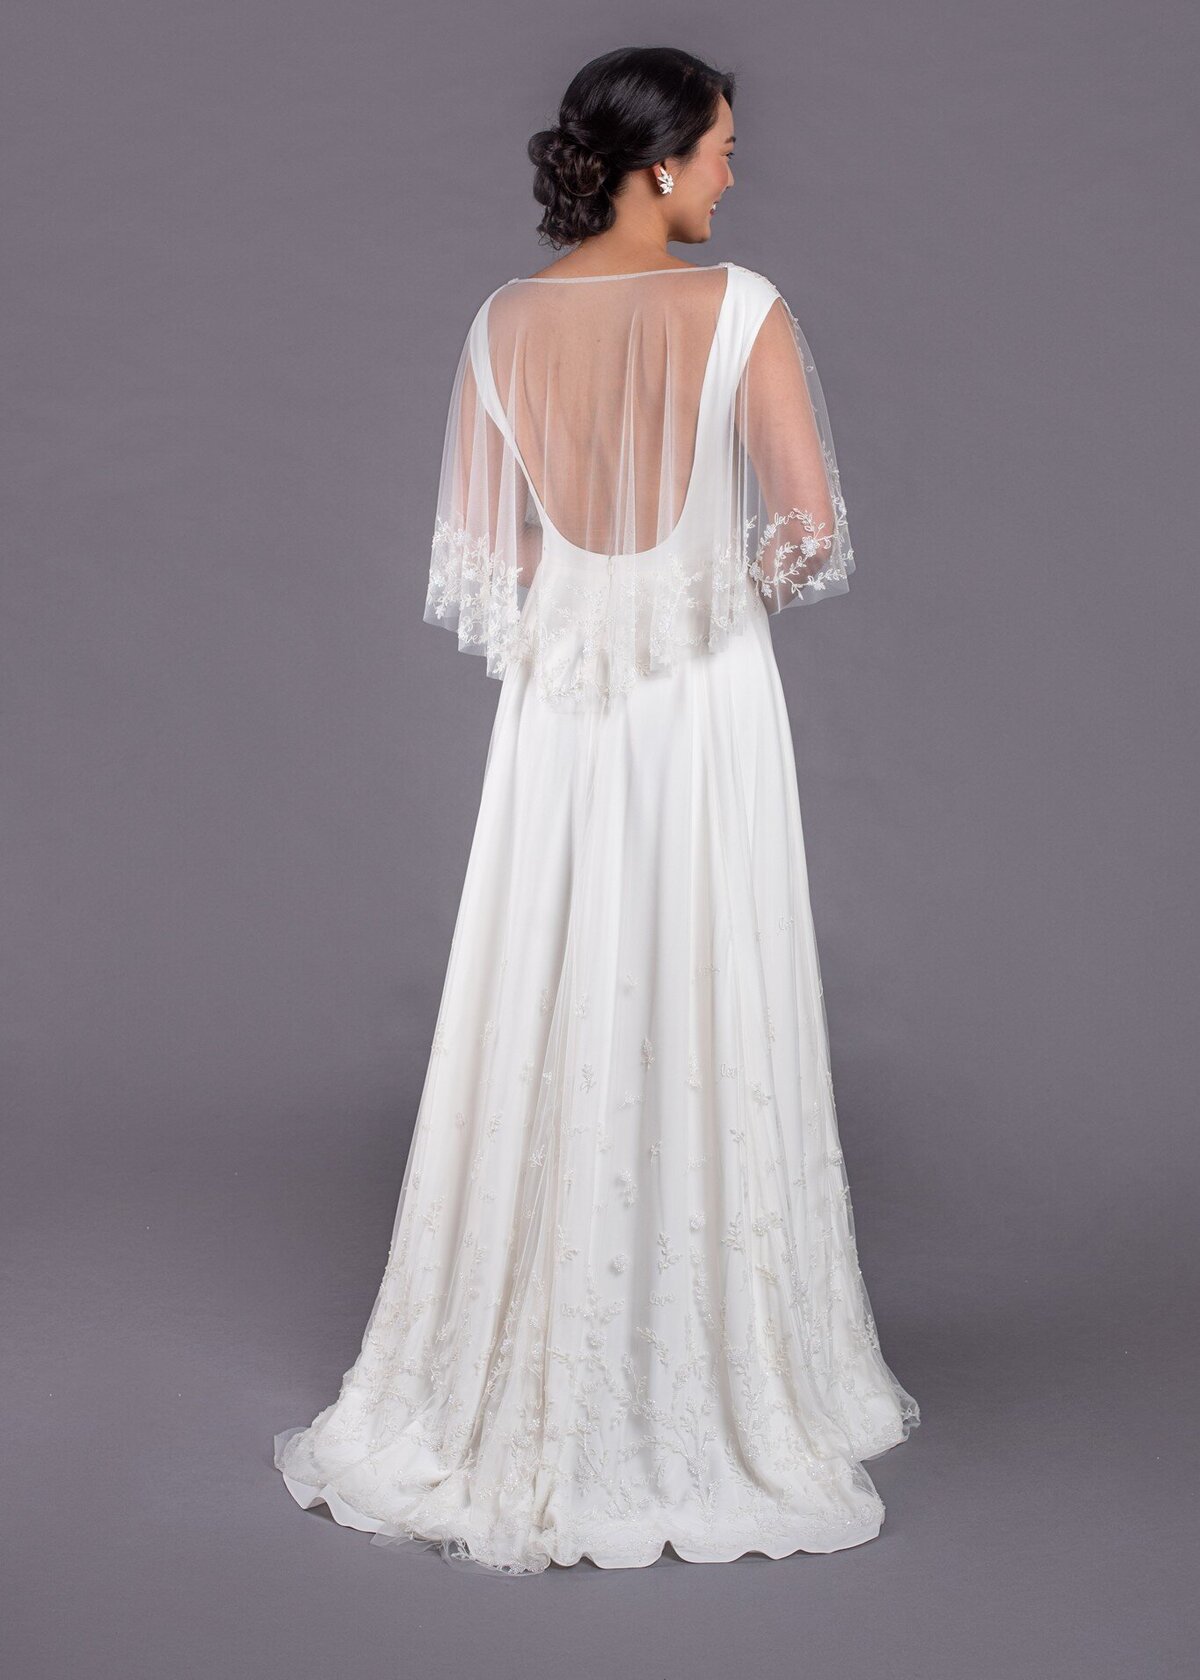 The Dolores style by Edith Elan is slim a-line wedding dress with a low back that can be seen through the beaded bridal capelet.